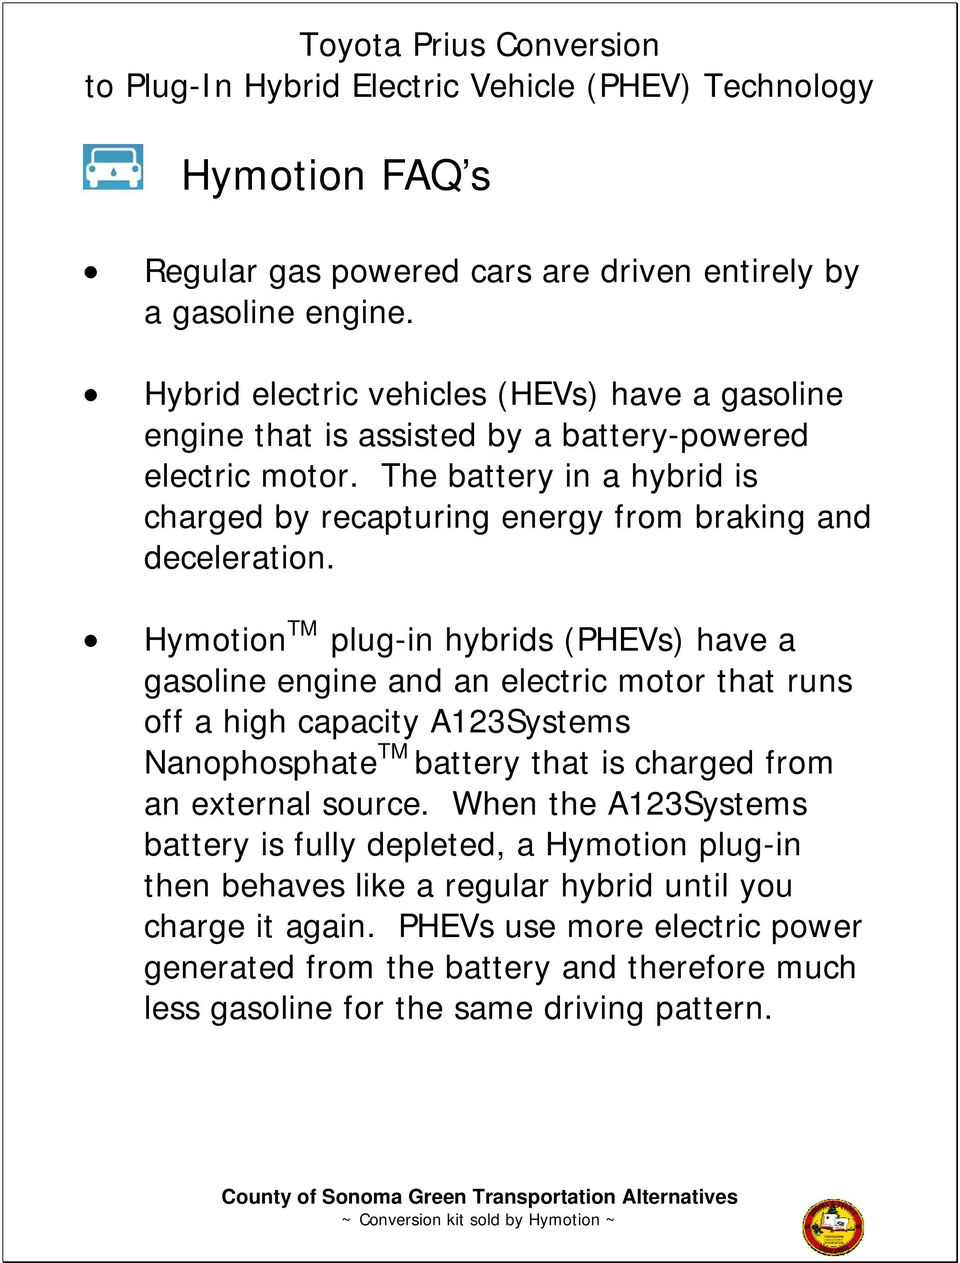 The battery in a hybrid is charged by recapturing energy from braking and deceleration.